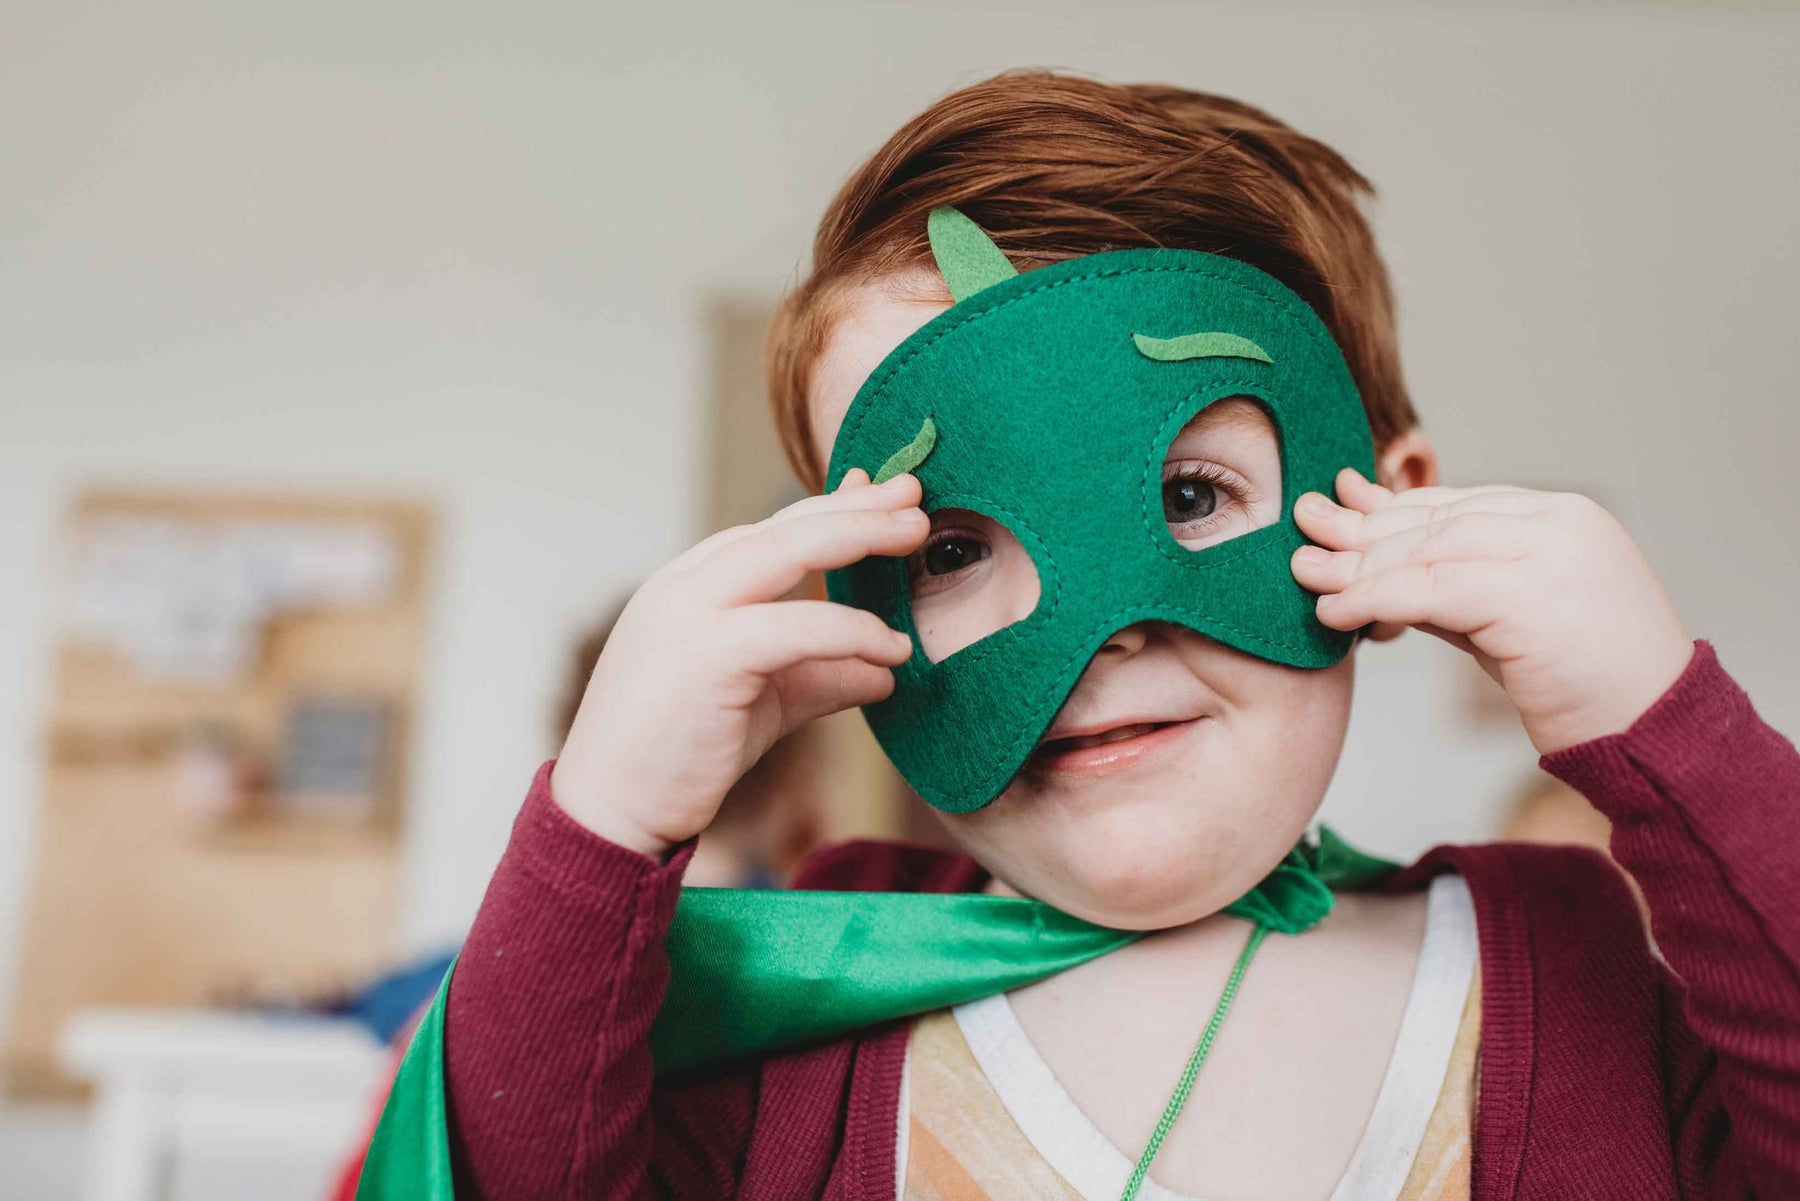 Every child can benefit from dress-up and pretened play. Let your child's imagination run wild as they fly around like a superhero or dance like a princess